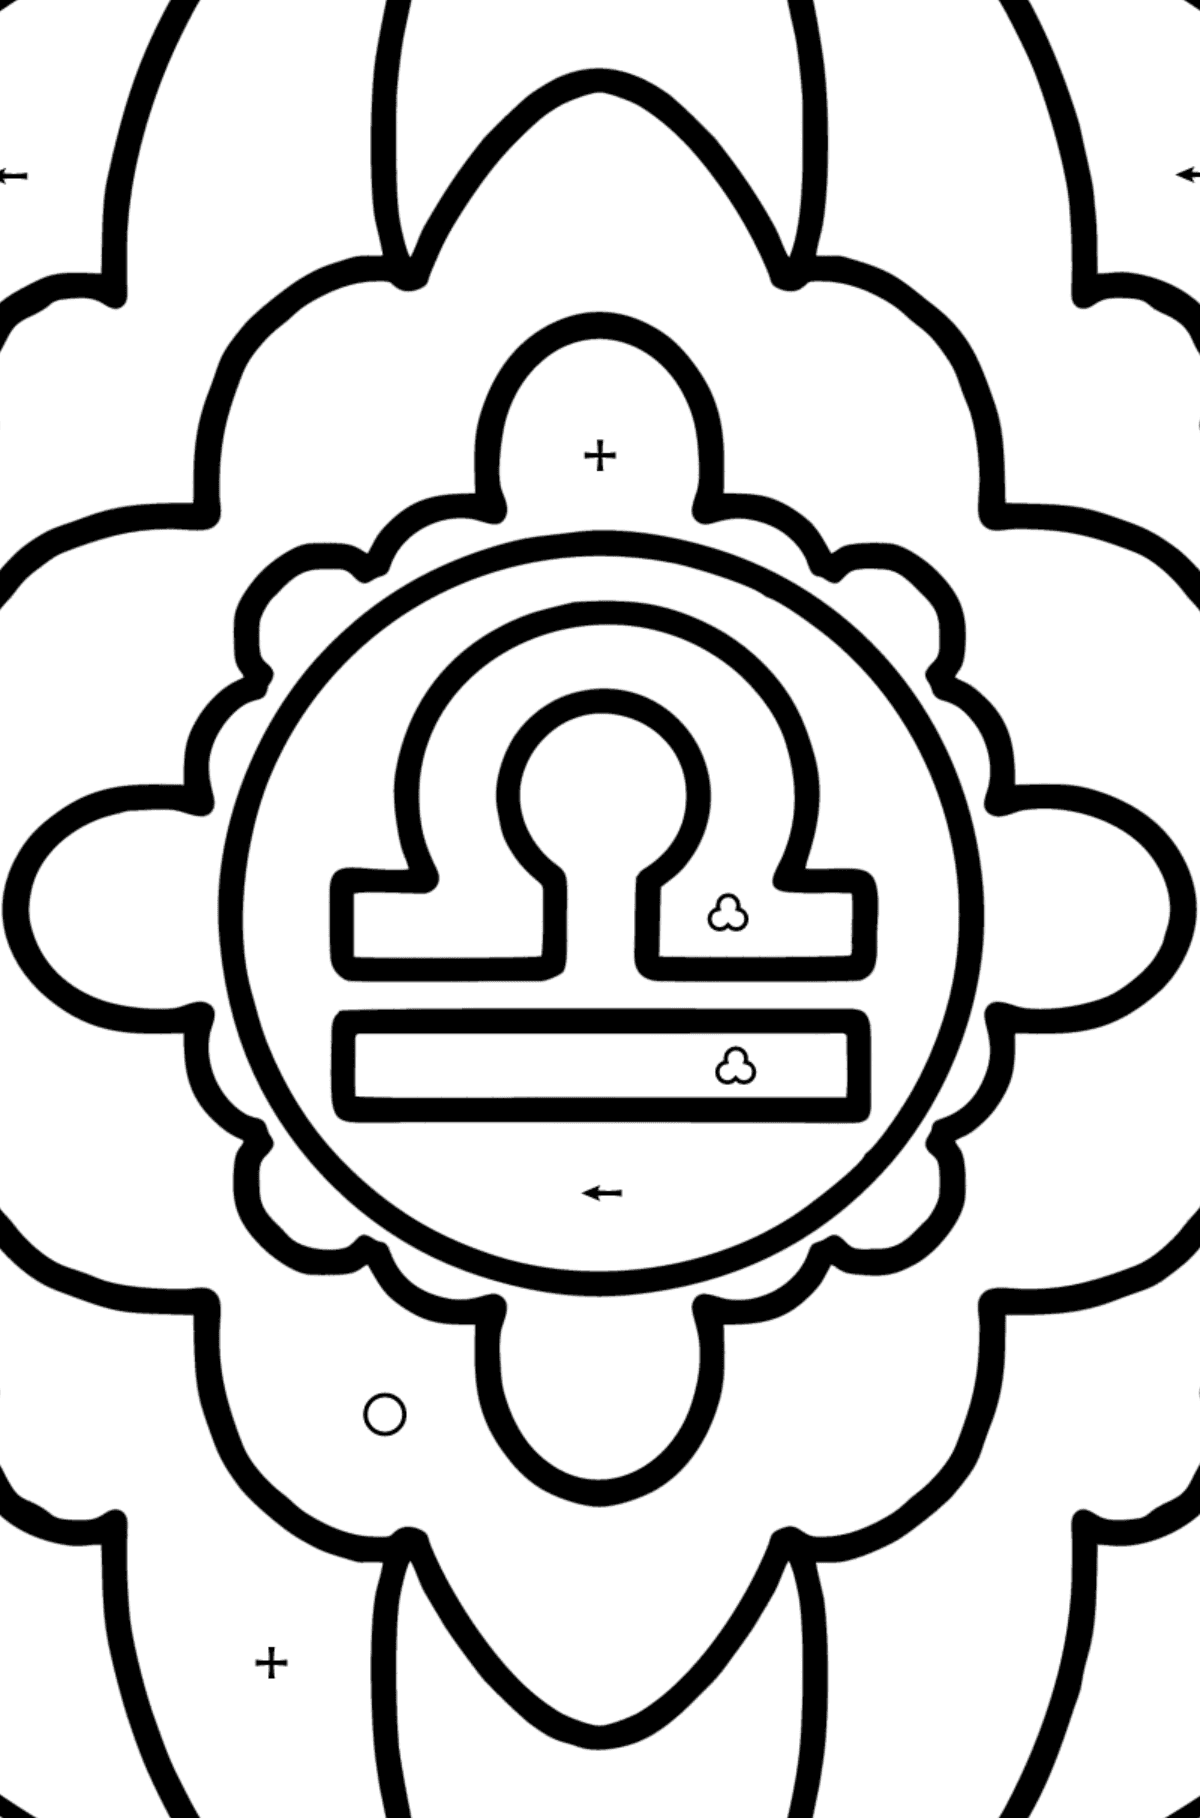 Coloring page - zodiac sign Libra - Coloring by Symbols and Geometric Shapes for Kids